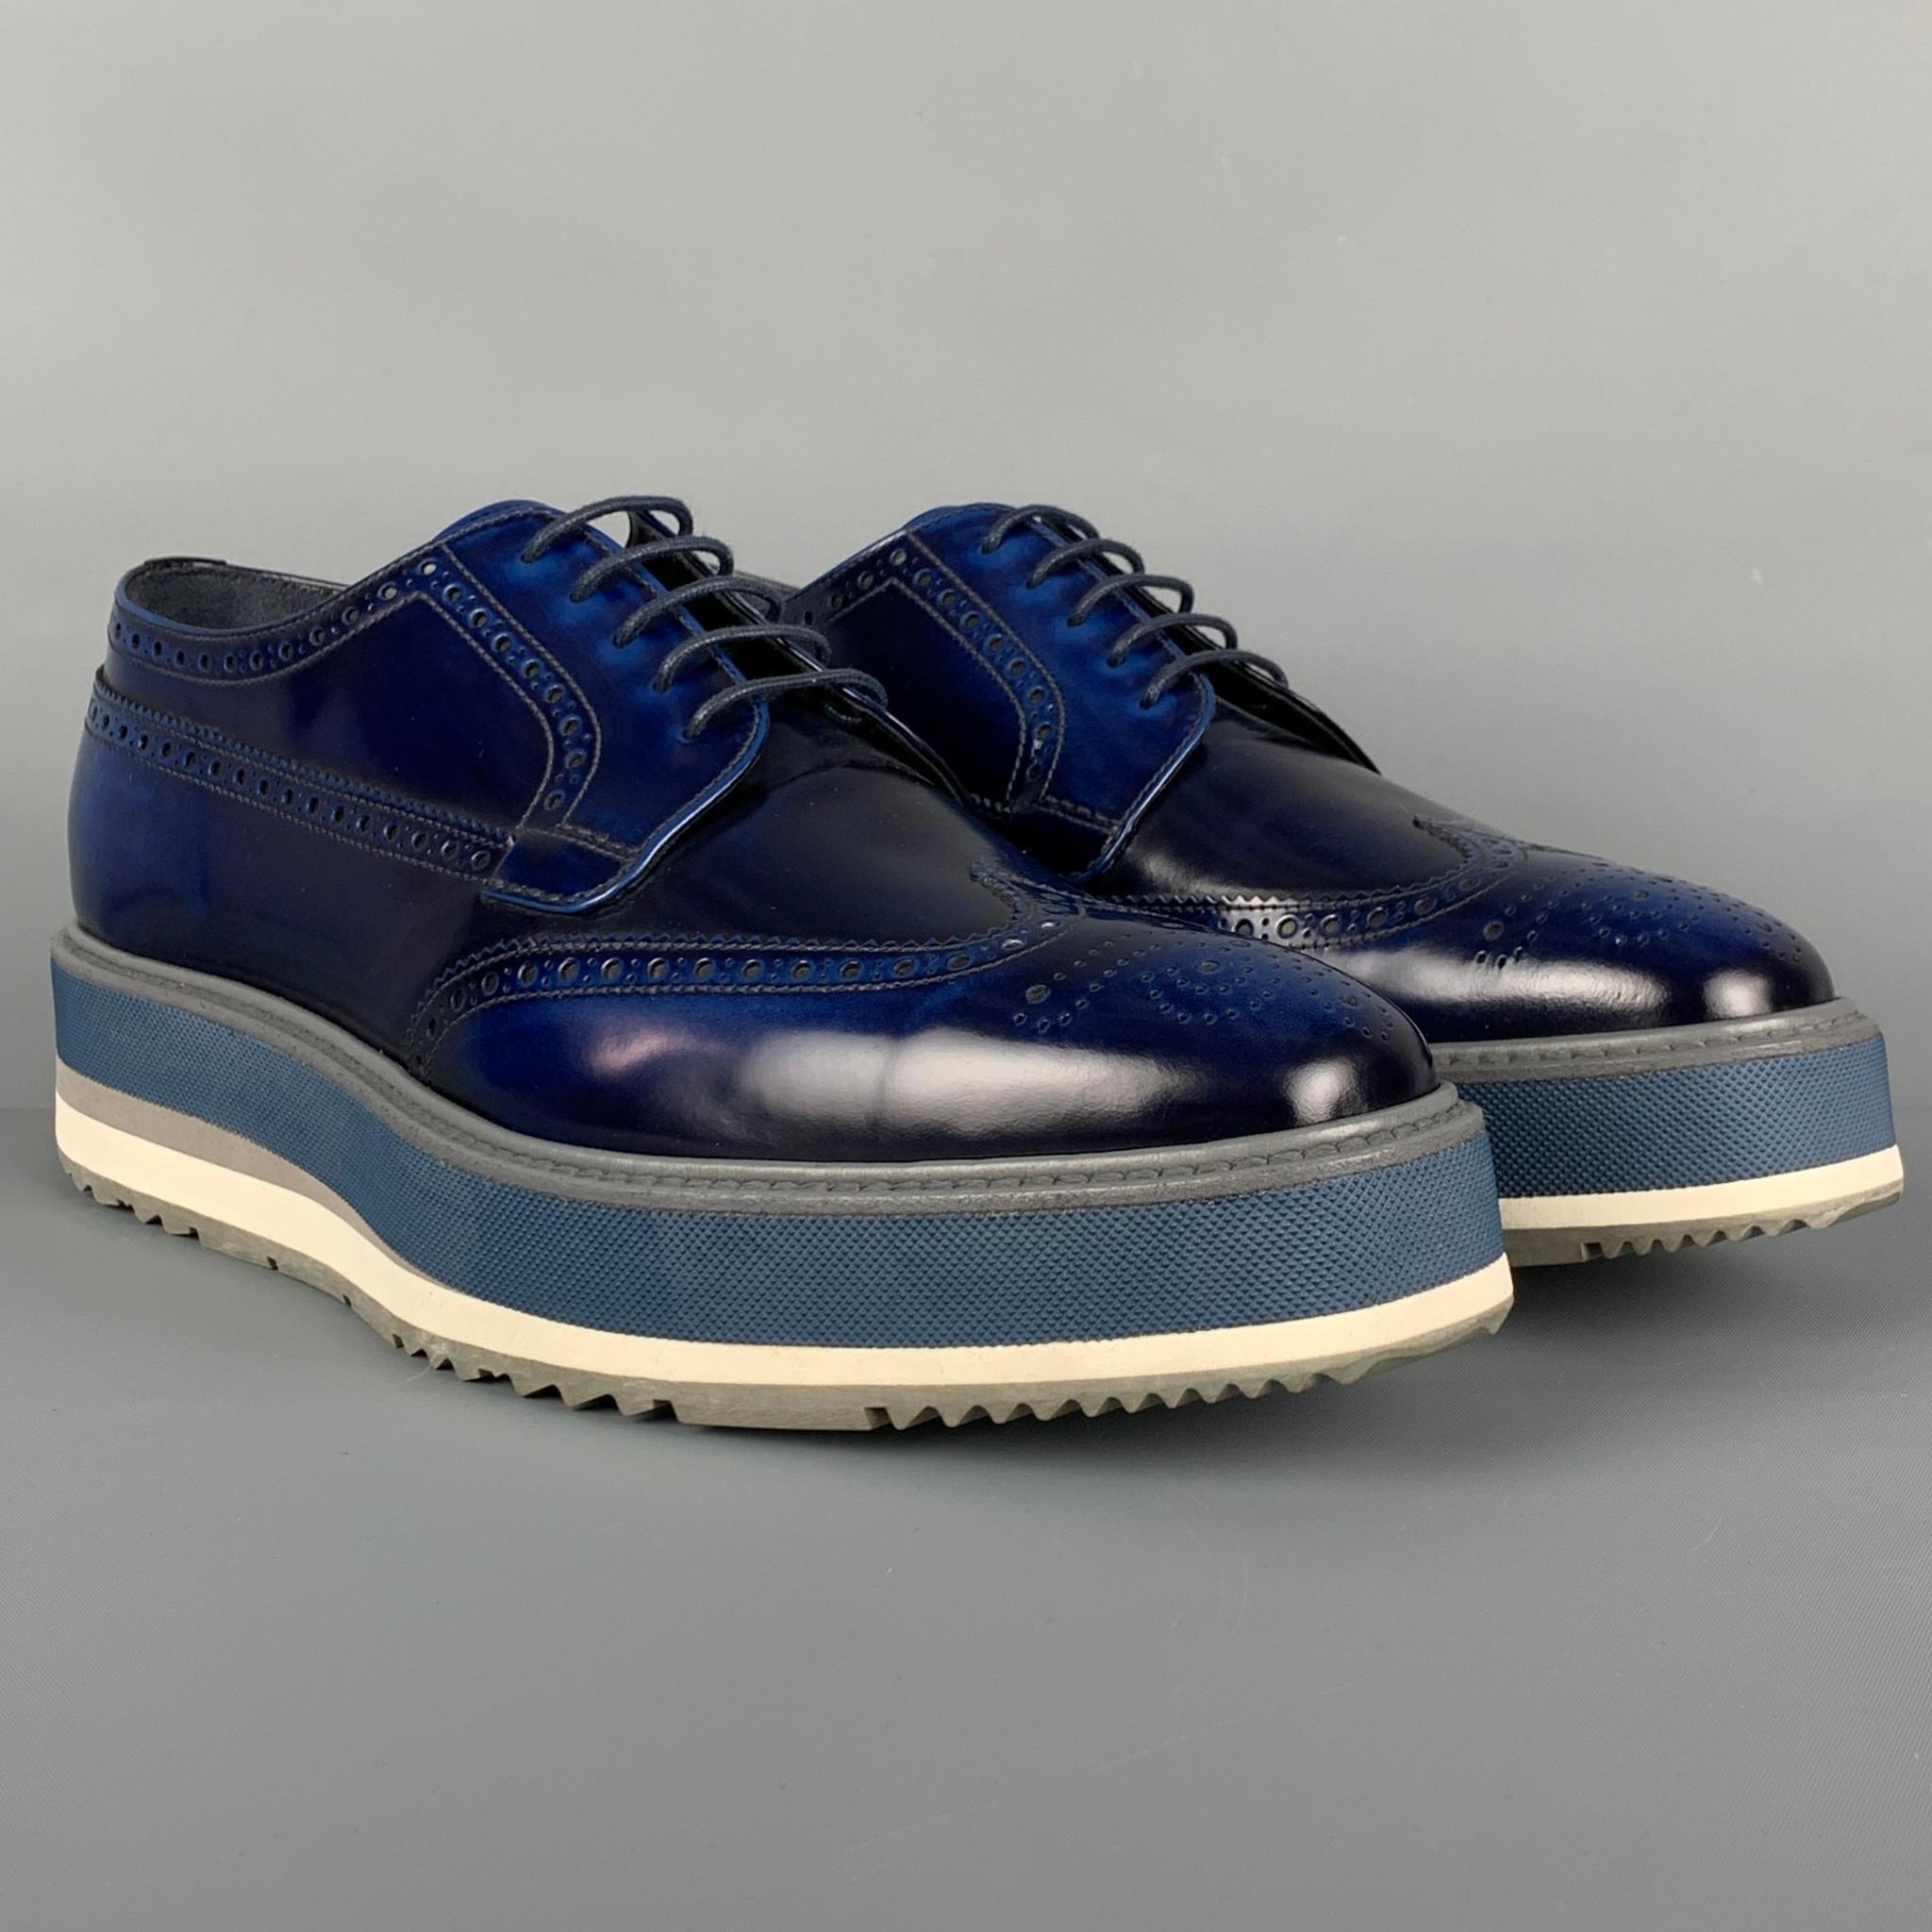 PRADA shoes comes in a blue perforated leather featuring a wingtip style, square toe, platform sole, and a lace up closure. Made in Italy. 

Very Good Pre-Owned Condition.
Marked: 2EG015 UK 8
Original Retail Price: $1,150.00

Outsole: 12.75 in. x